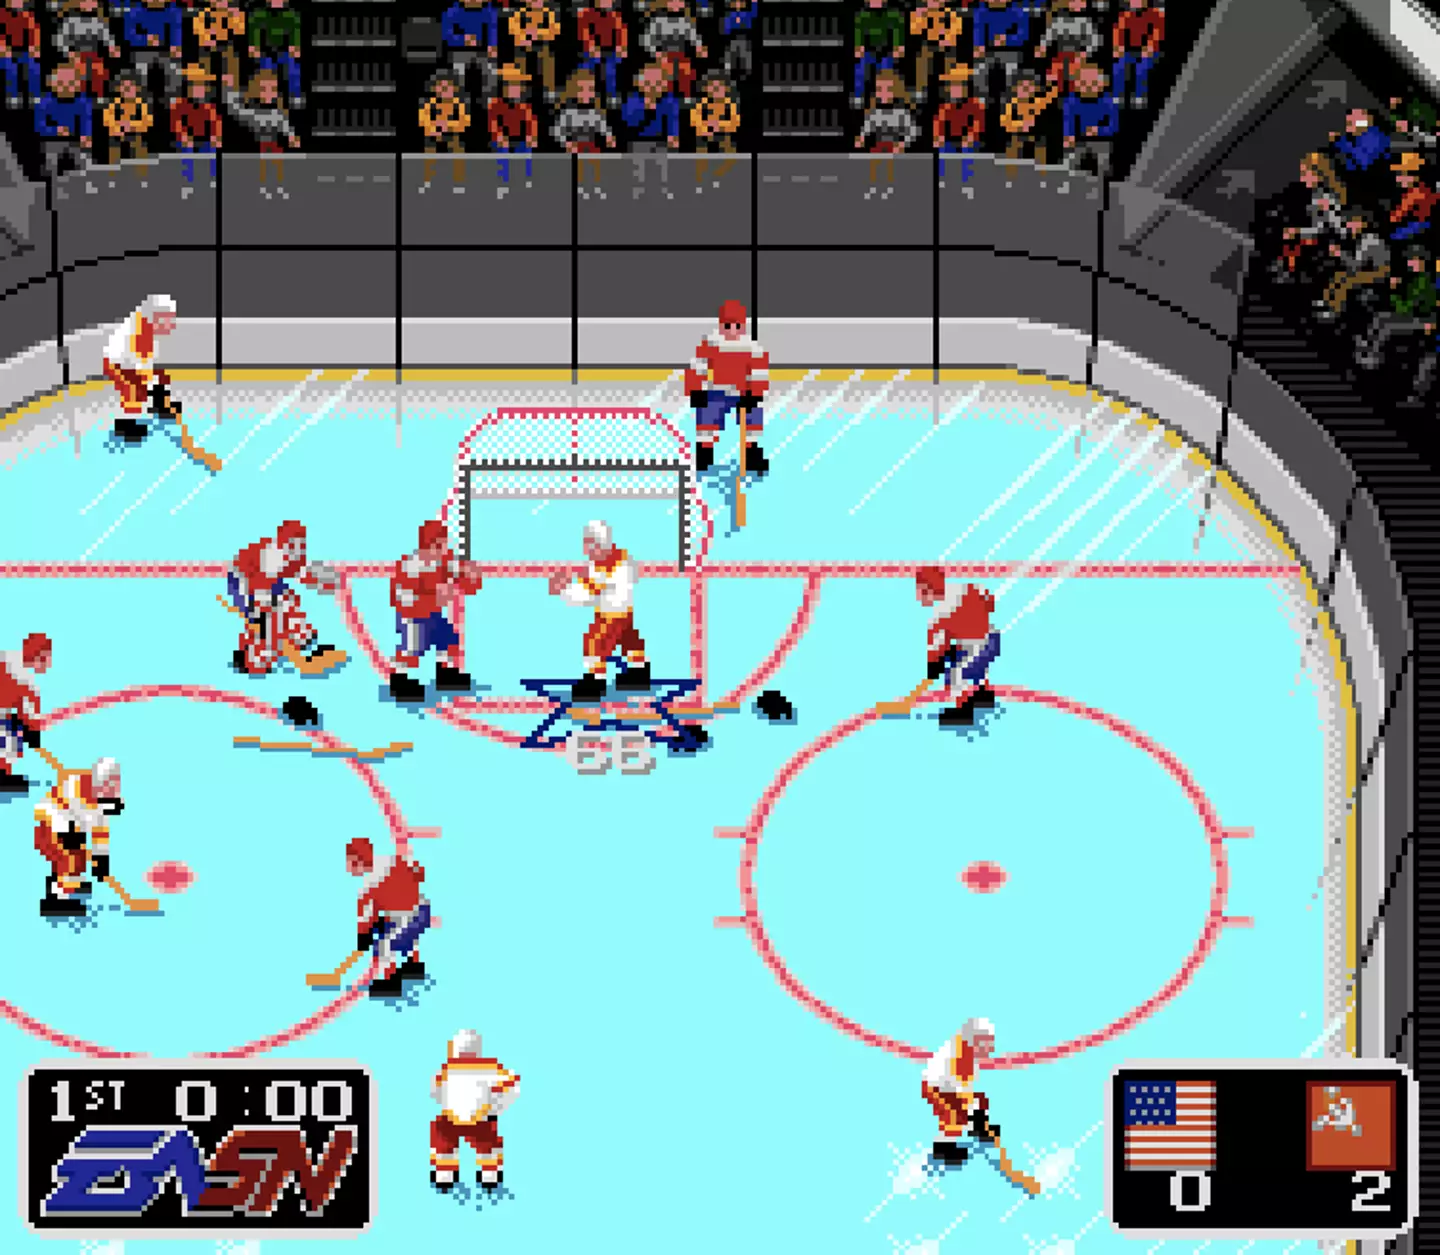 EA Hockey, aka NHL Hockey, was on EA Sports Double Header and was always great for one-on-one play with pals after school /